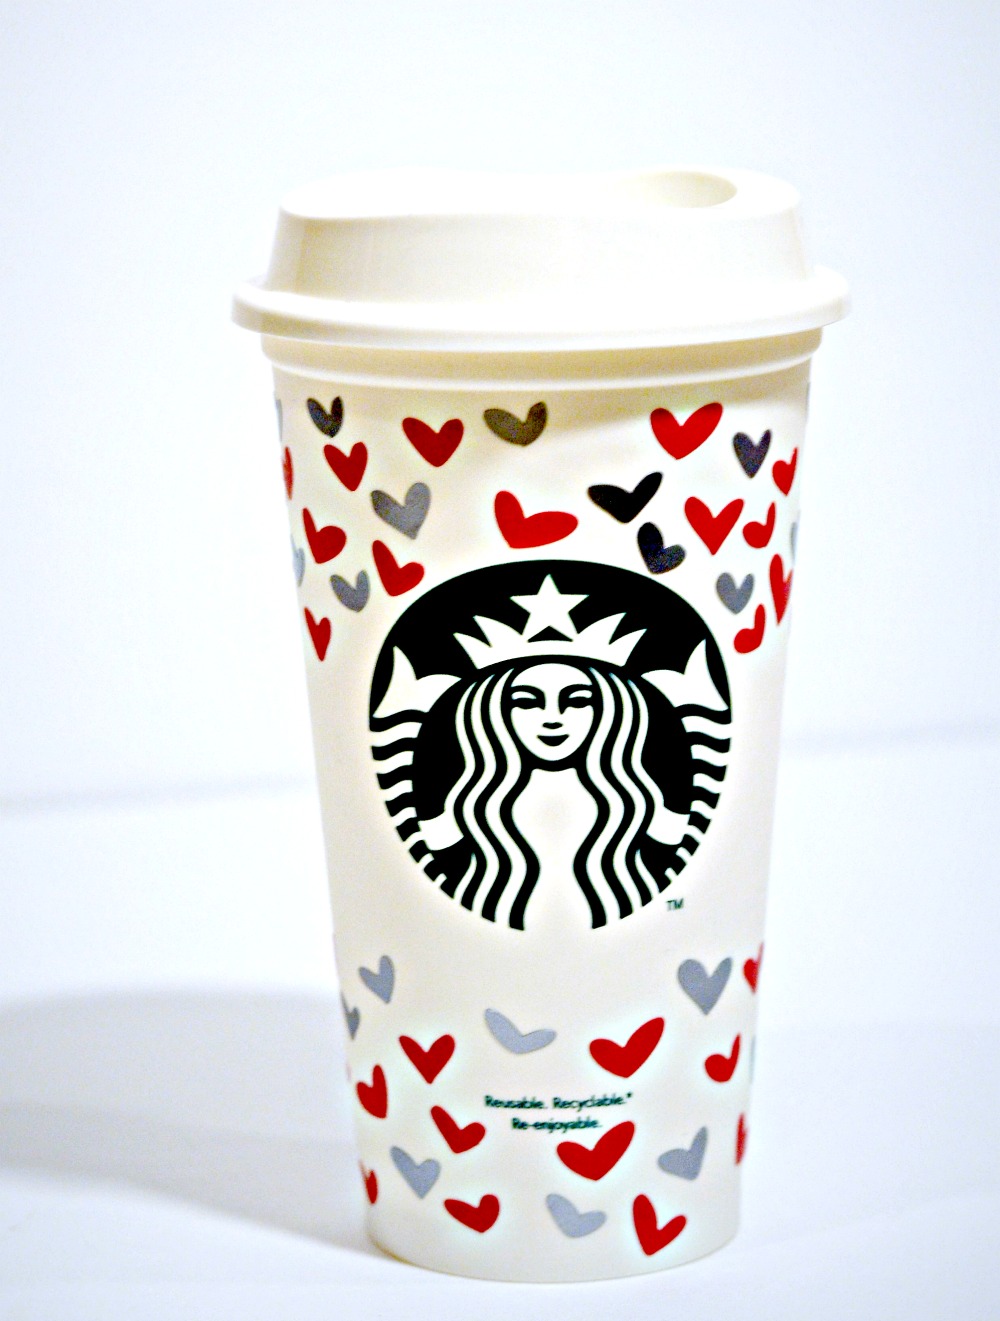 Personalized Starbucks Cup with Cricut: The Perfect Valentines's